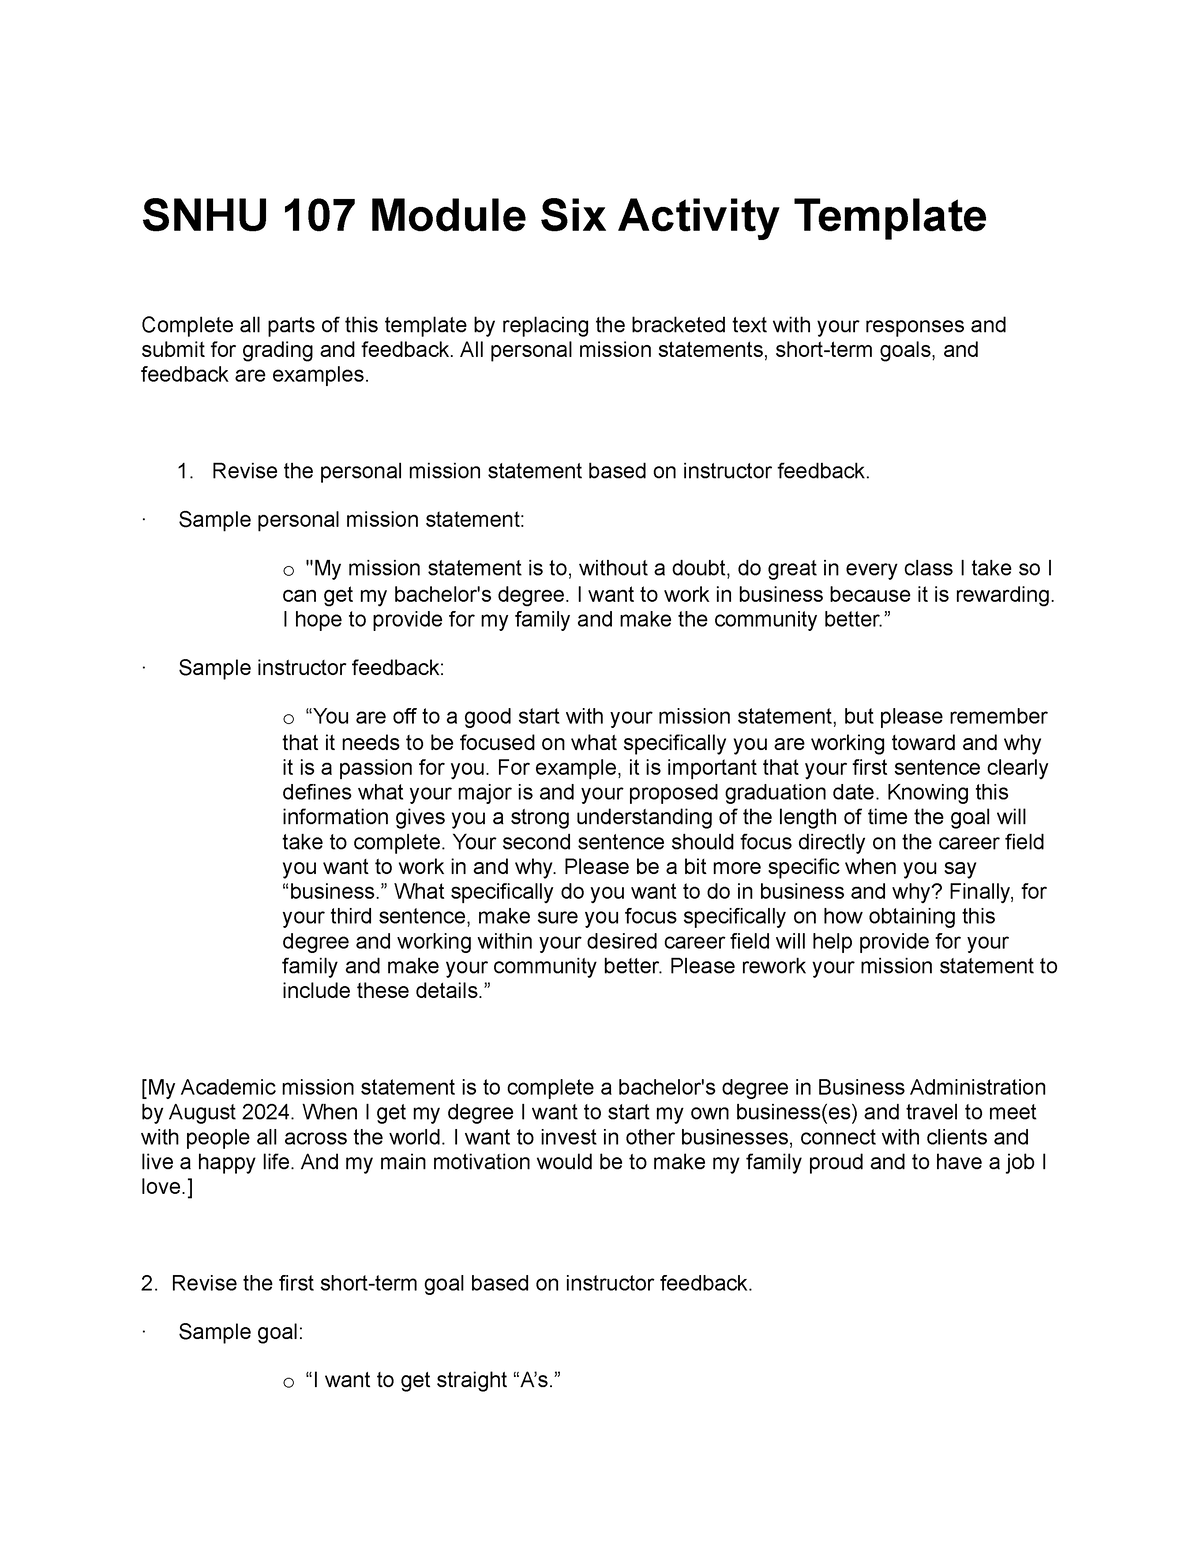 untitled-document-module-six-template-snhu-107-module-six-activity-template-complete-all